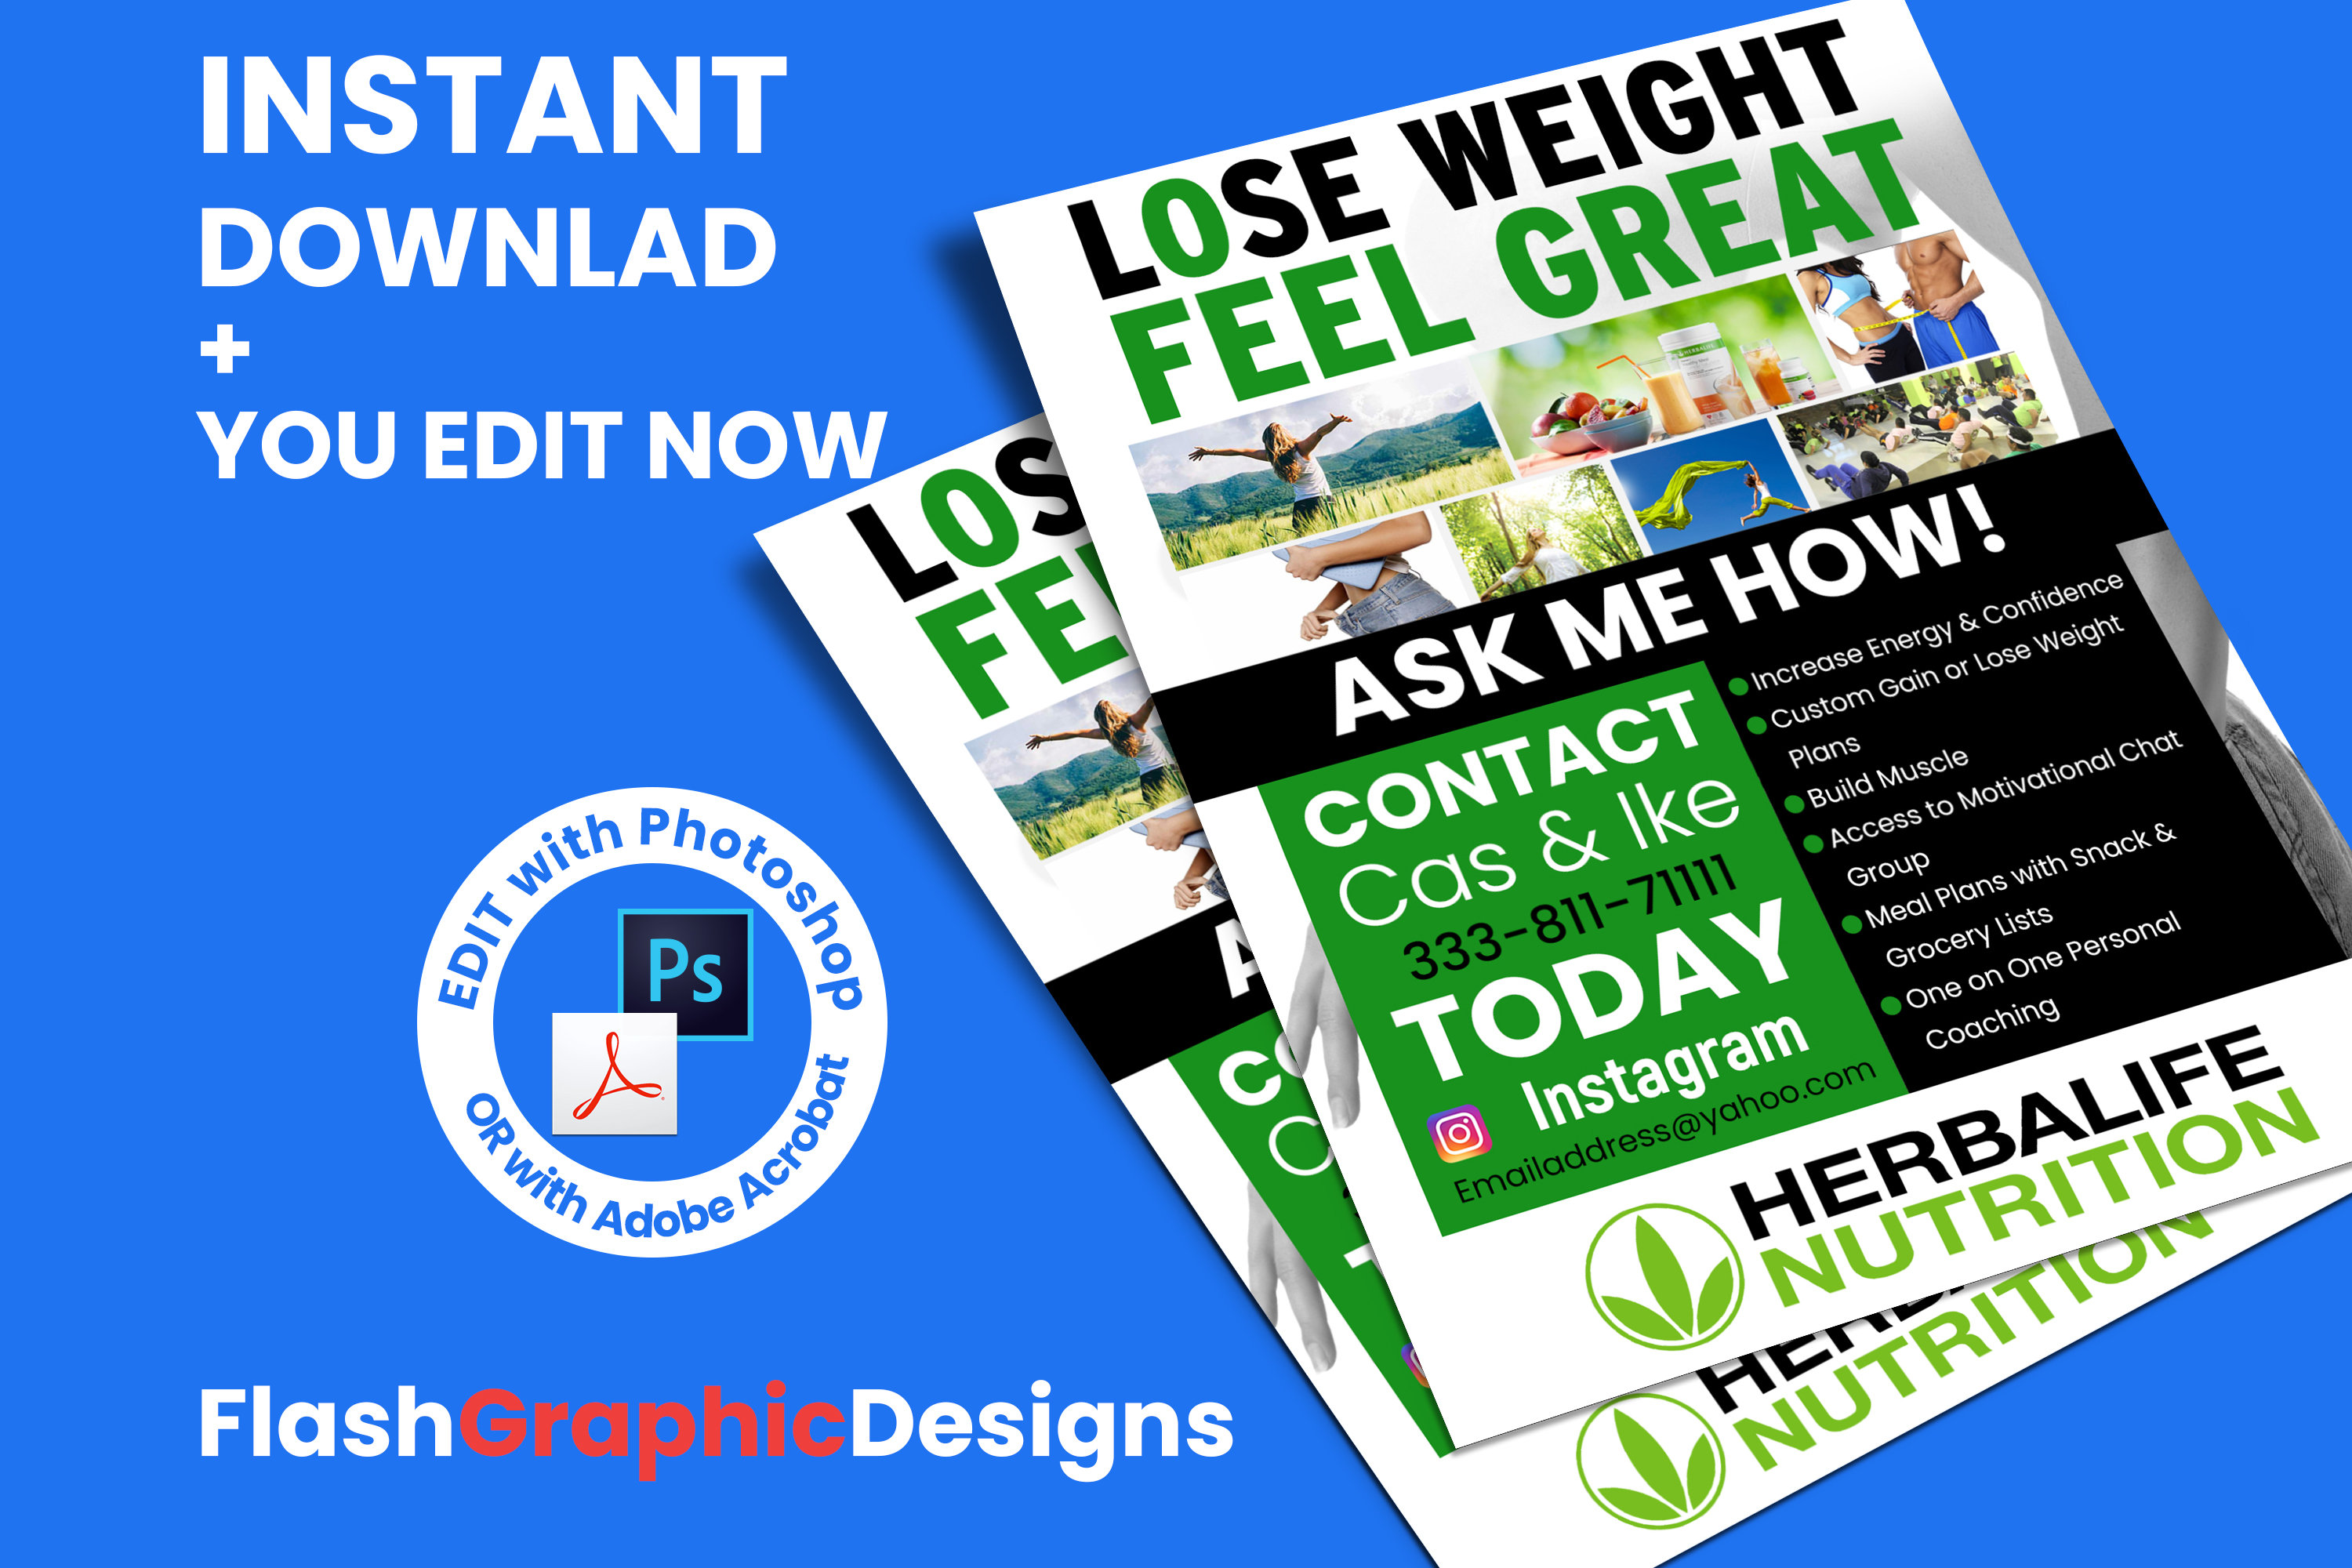 Start today Weight loss Herbalife flyer Template